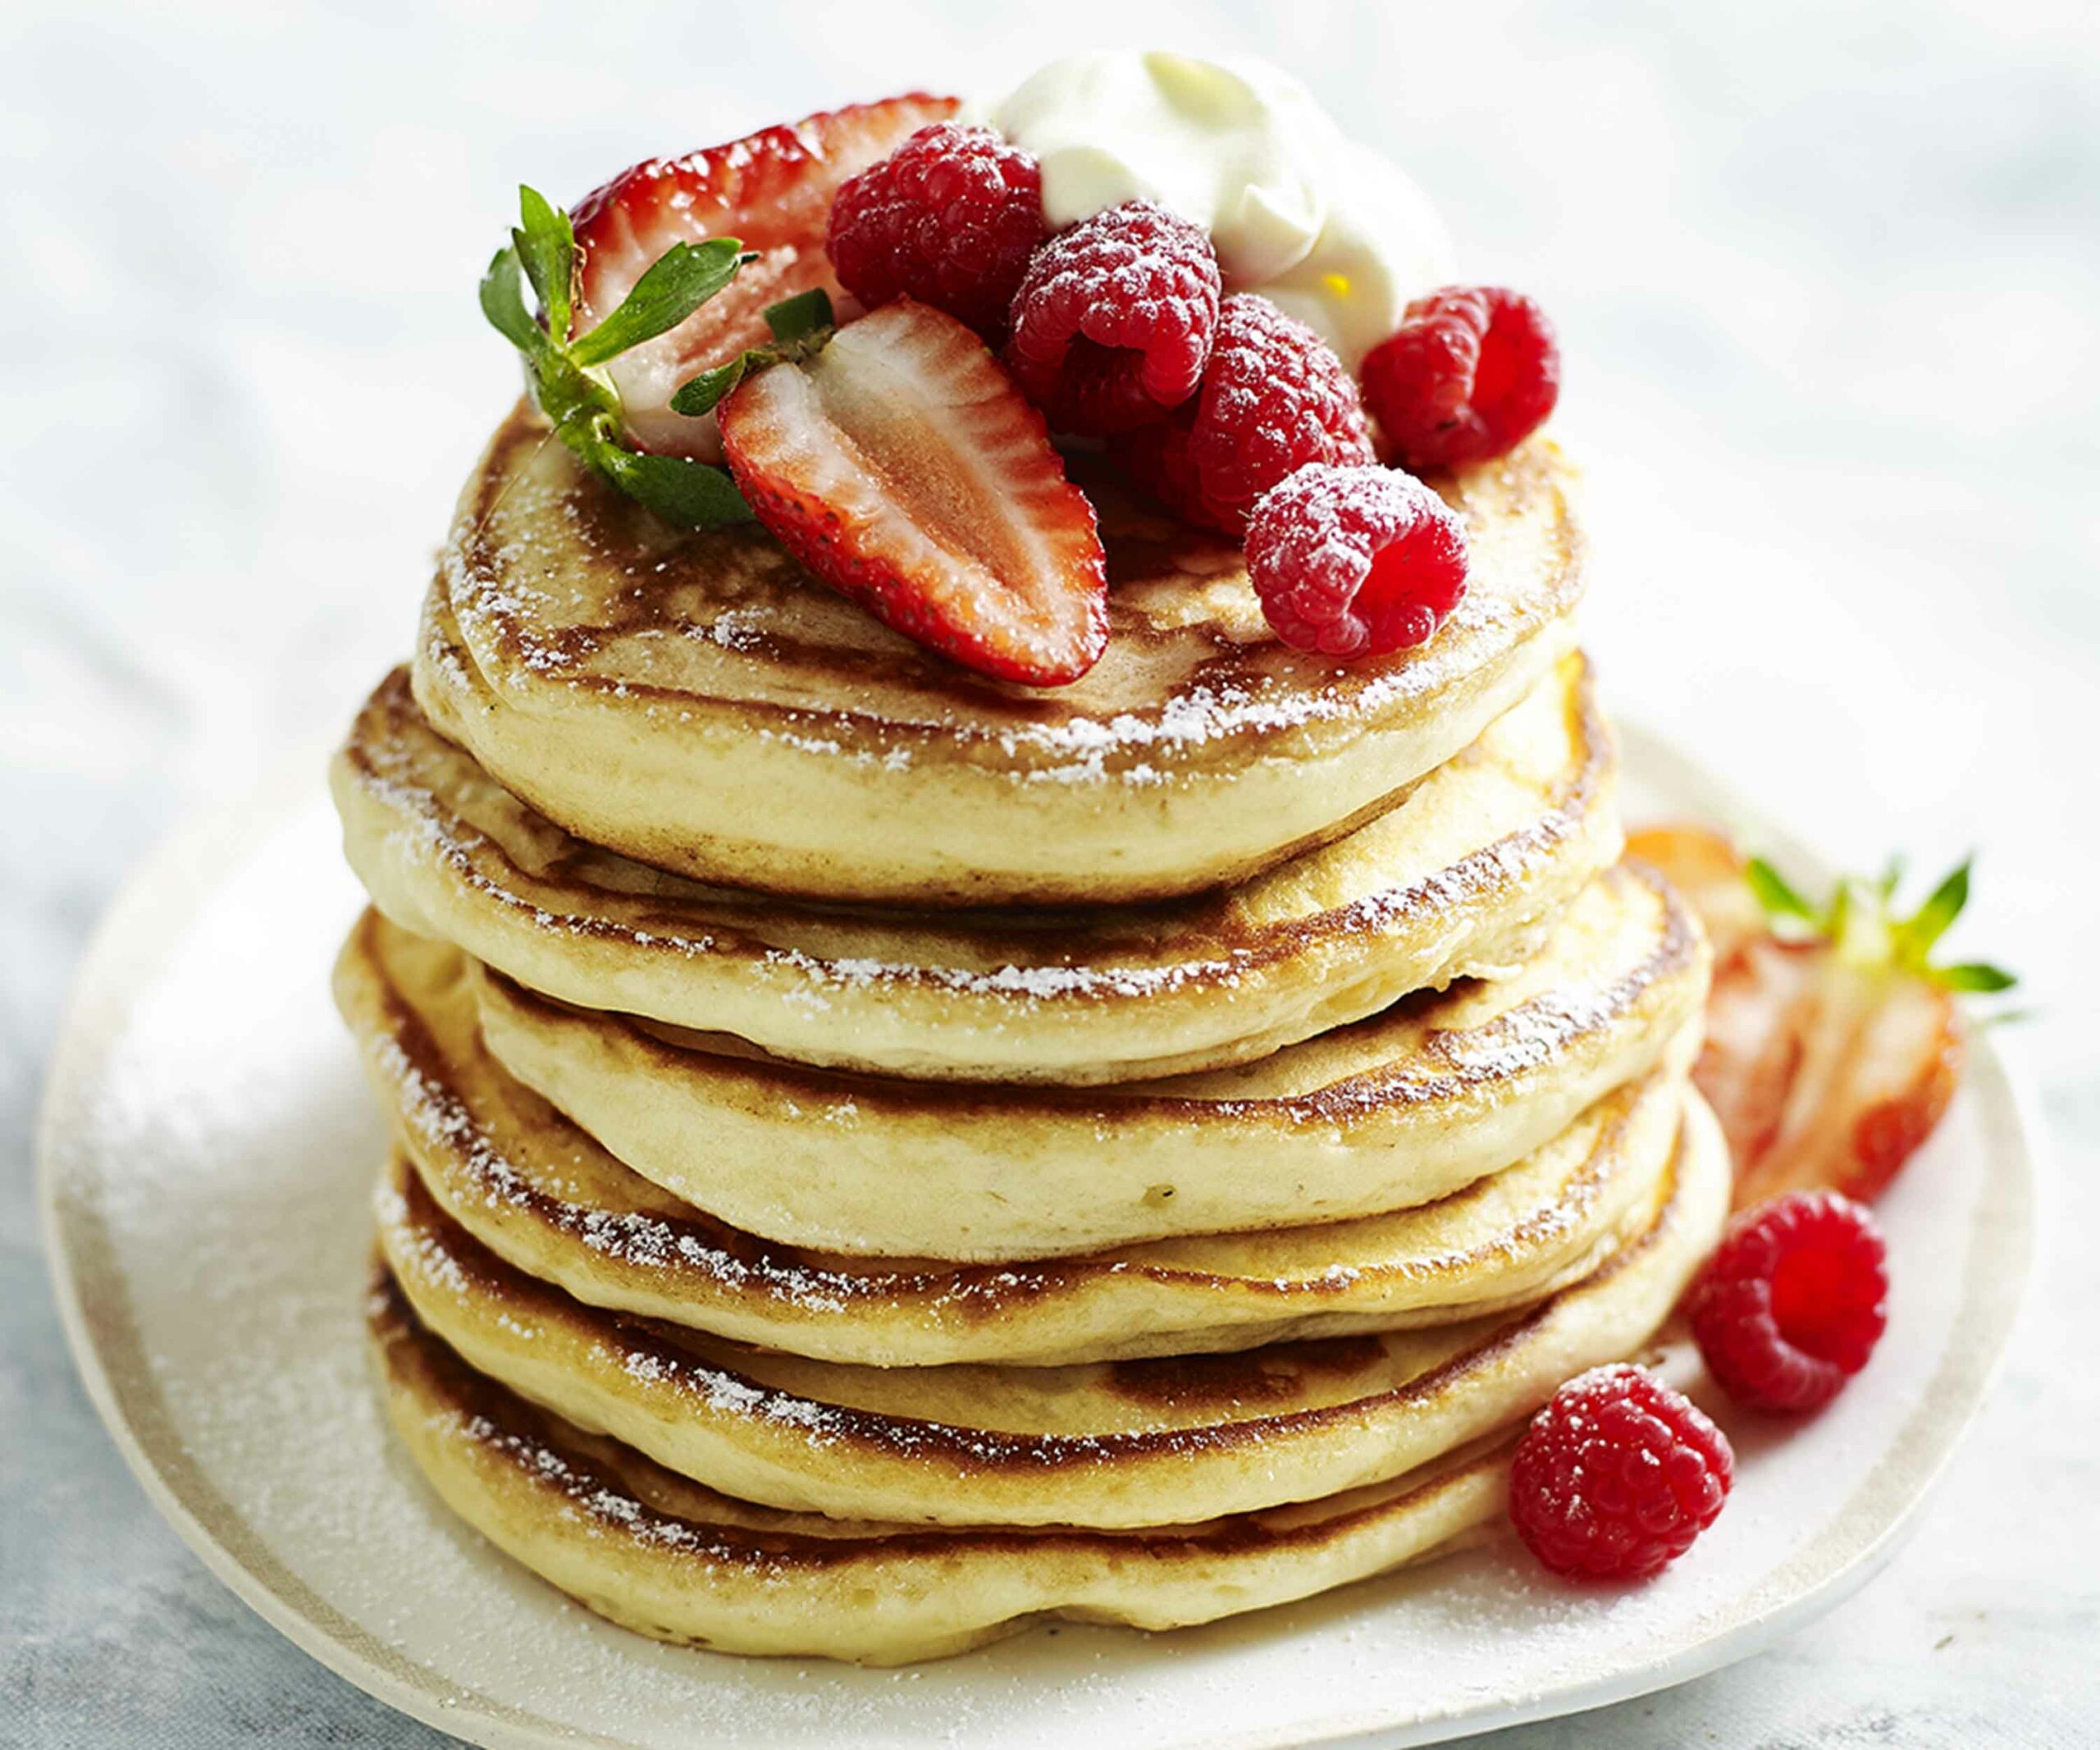 a stack of pancakes on a plate, topped with berries